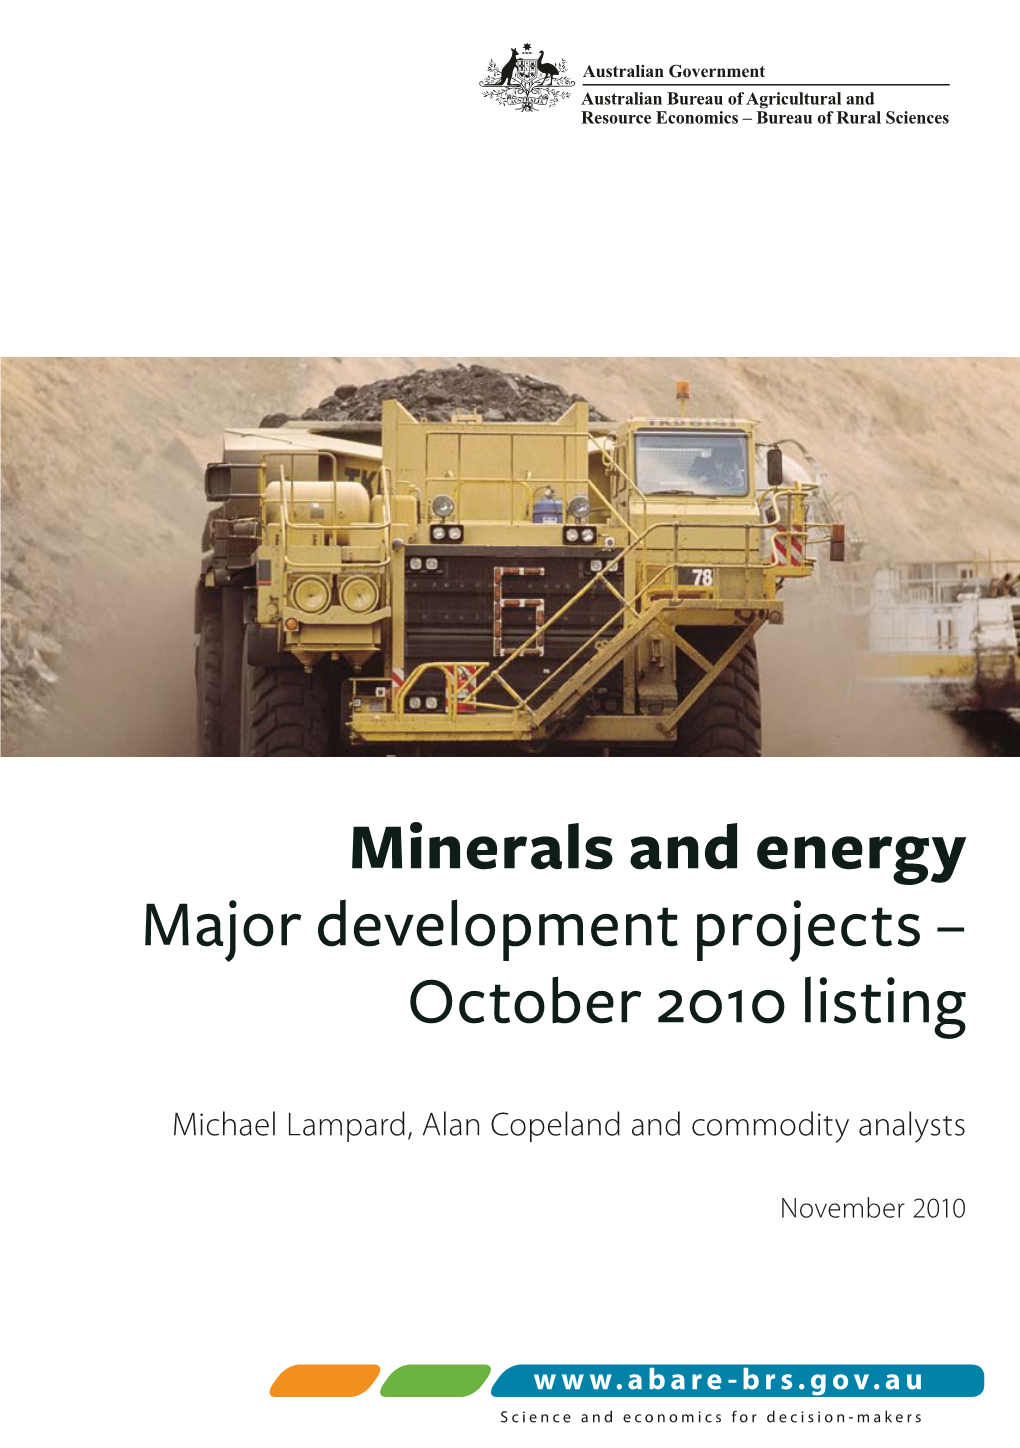 Minerals and Energy Major Development Projects – October 2010 Listing